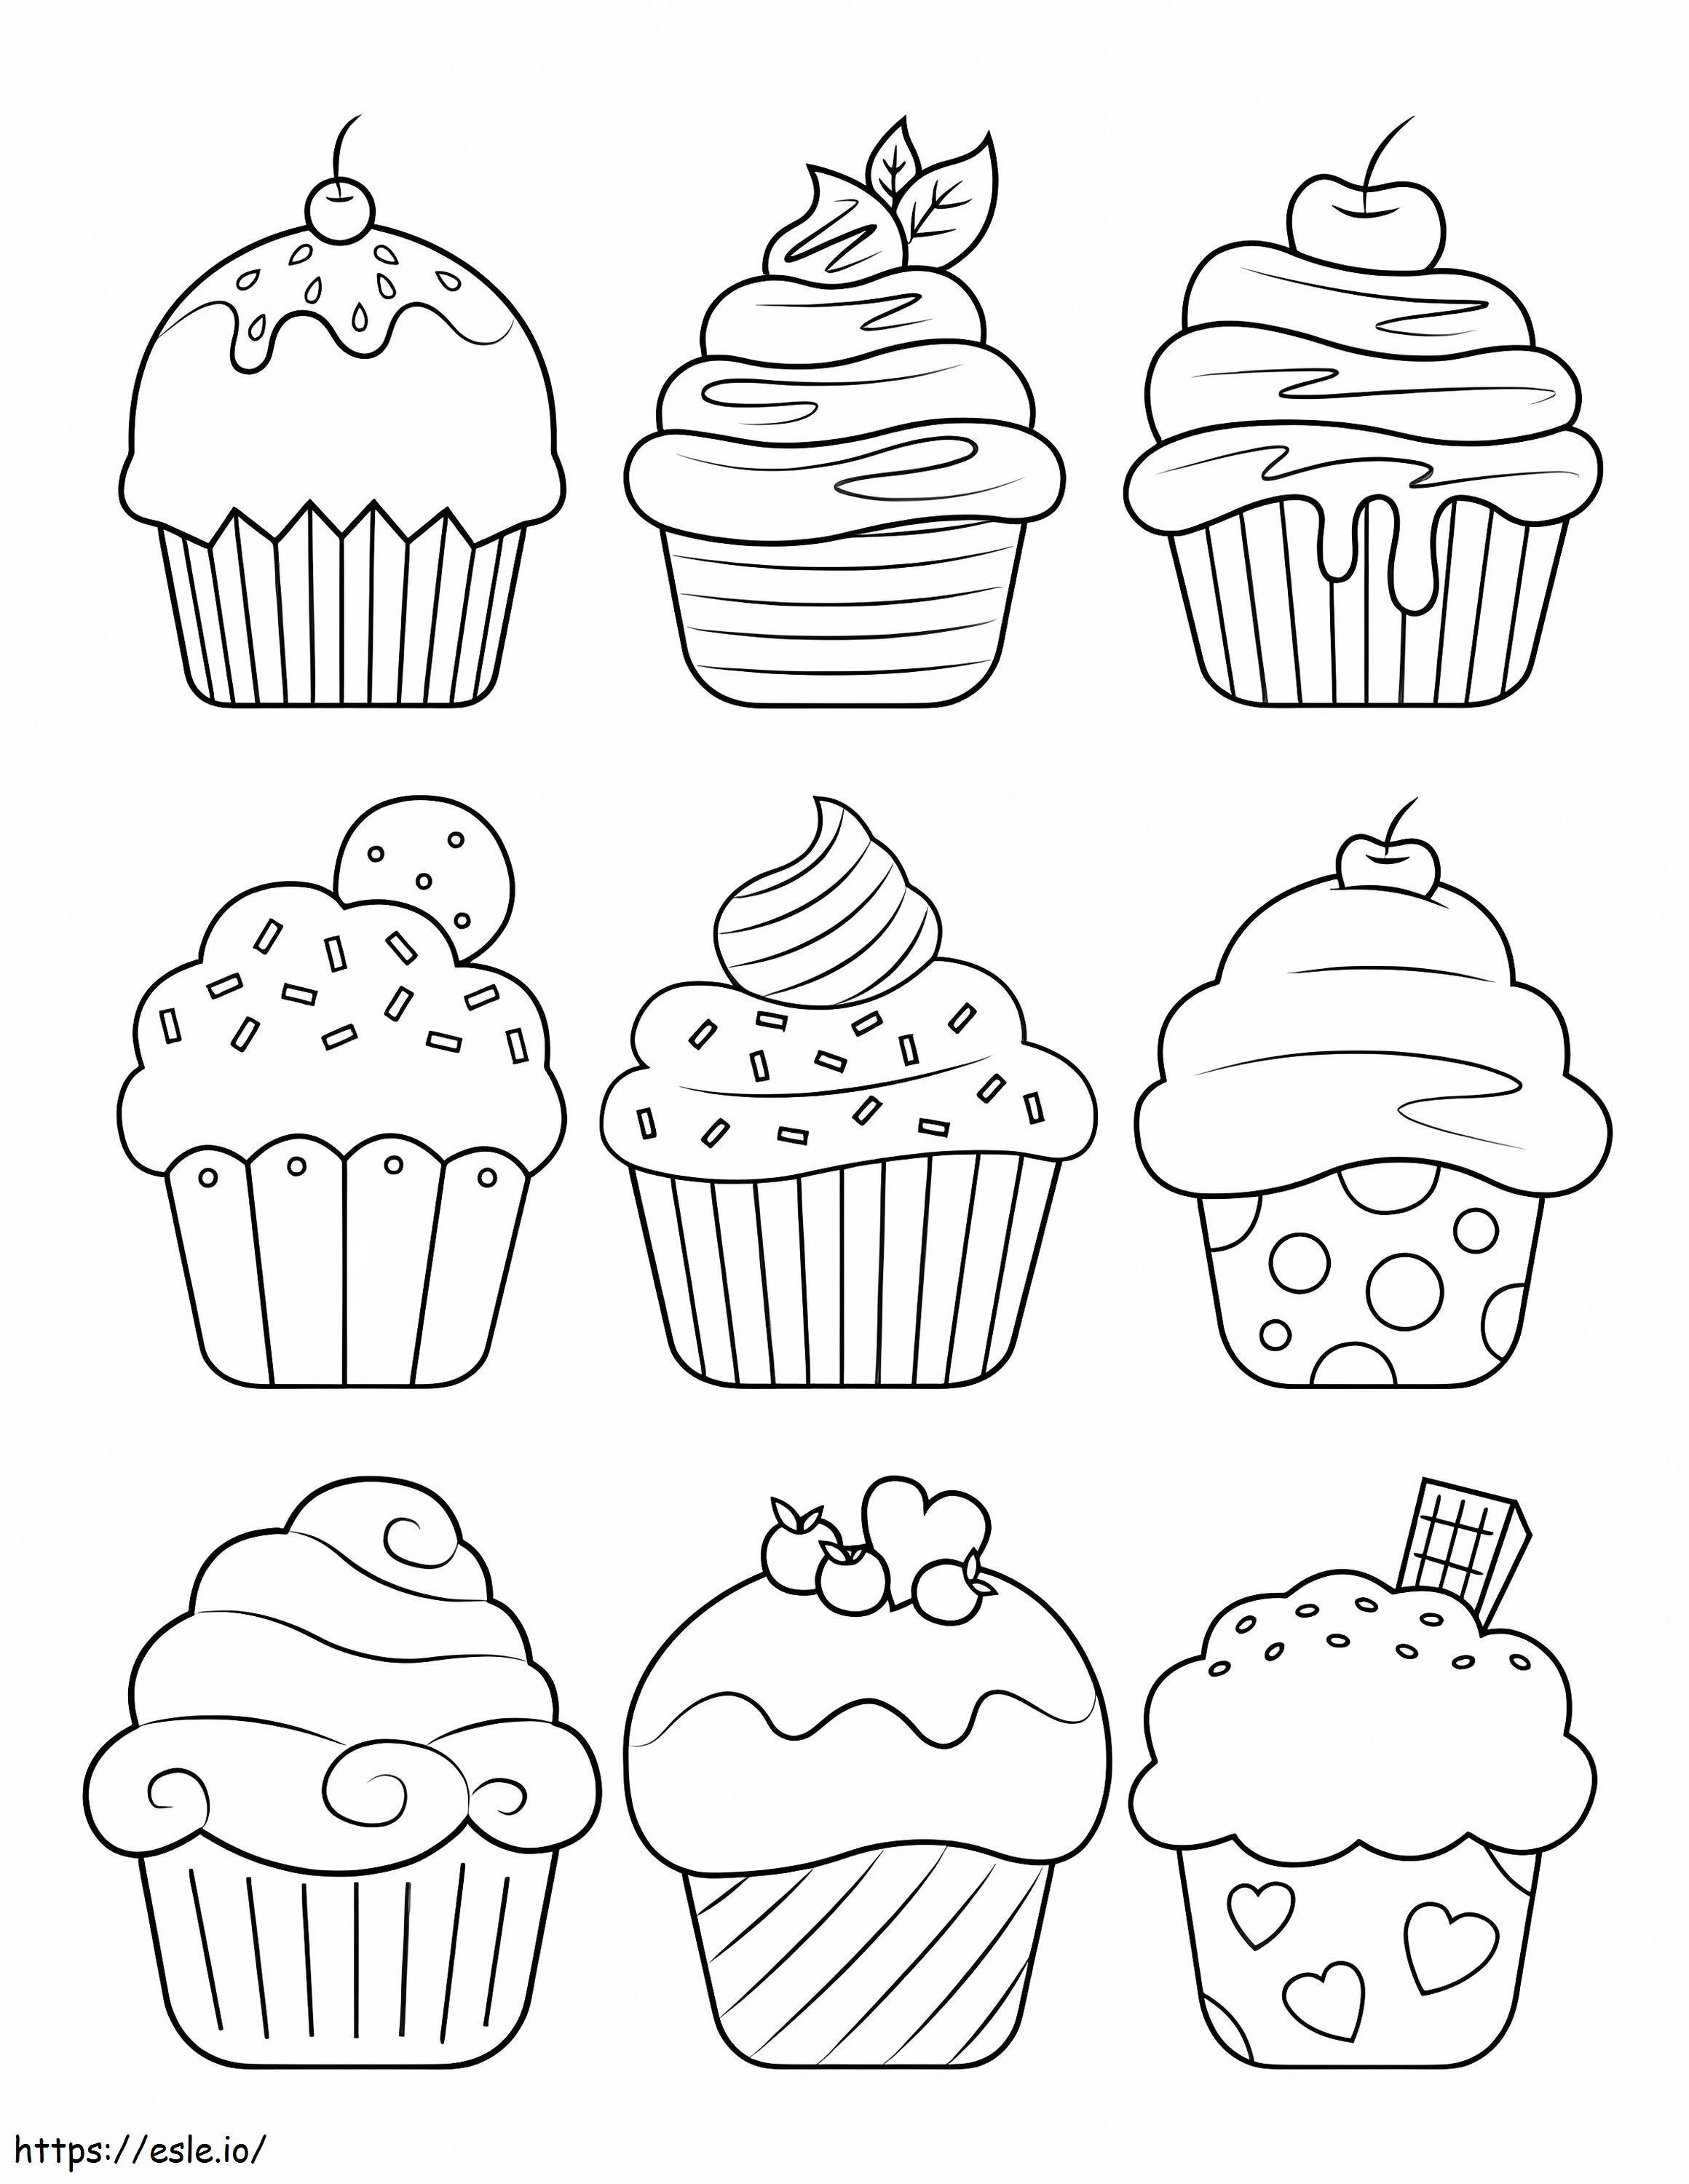 Nine Cupcakes coloring page